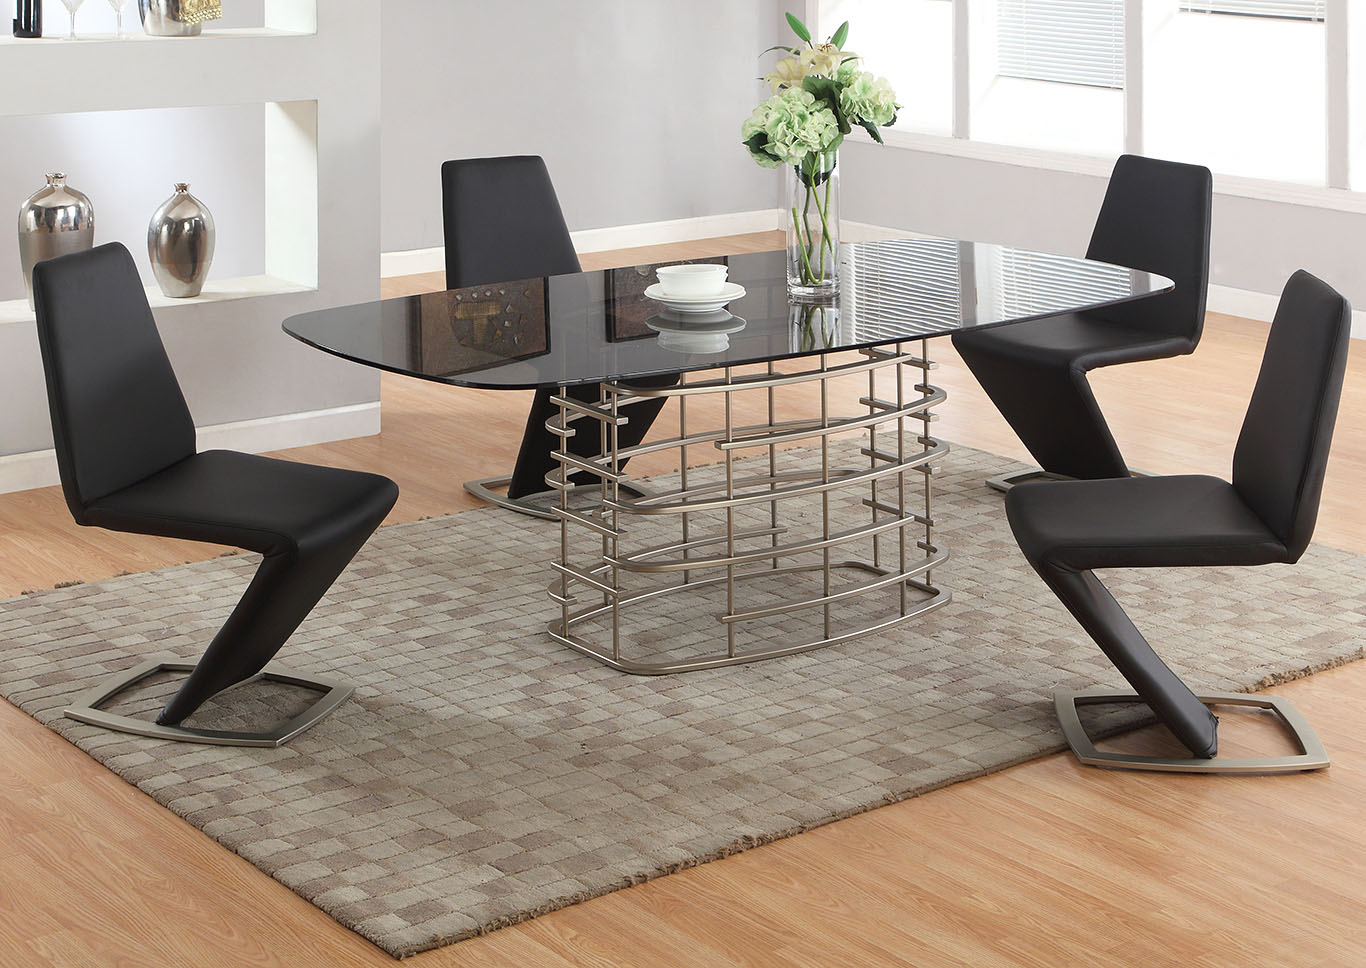 Abby Dining Table w/4 Black Chairs,Chintaly Imports